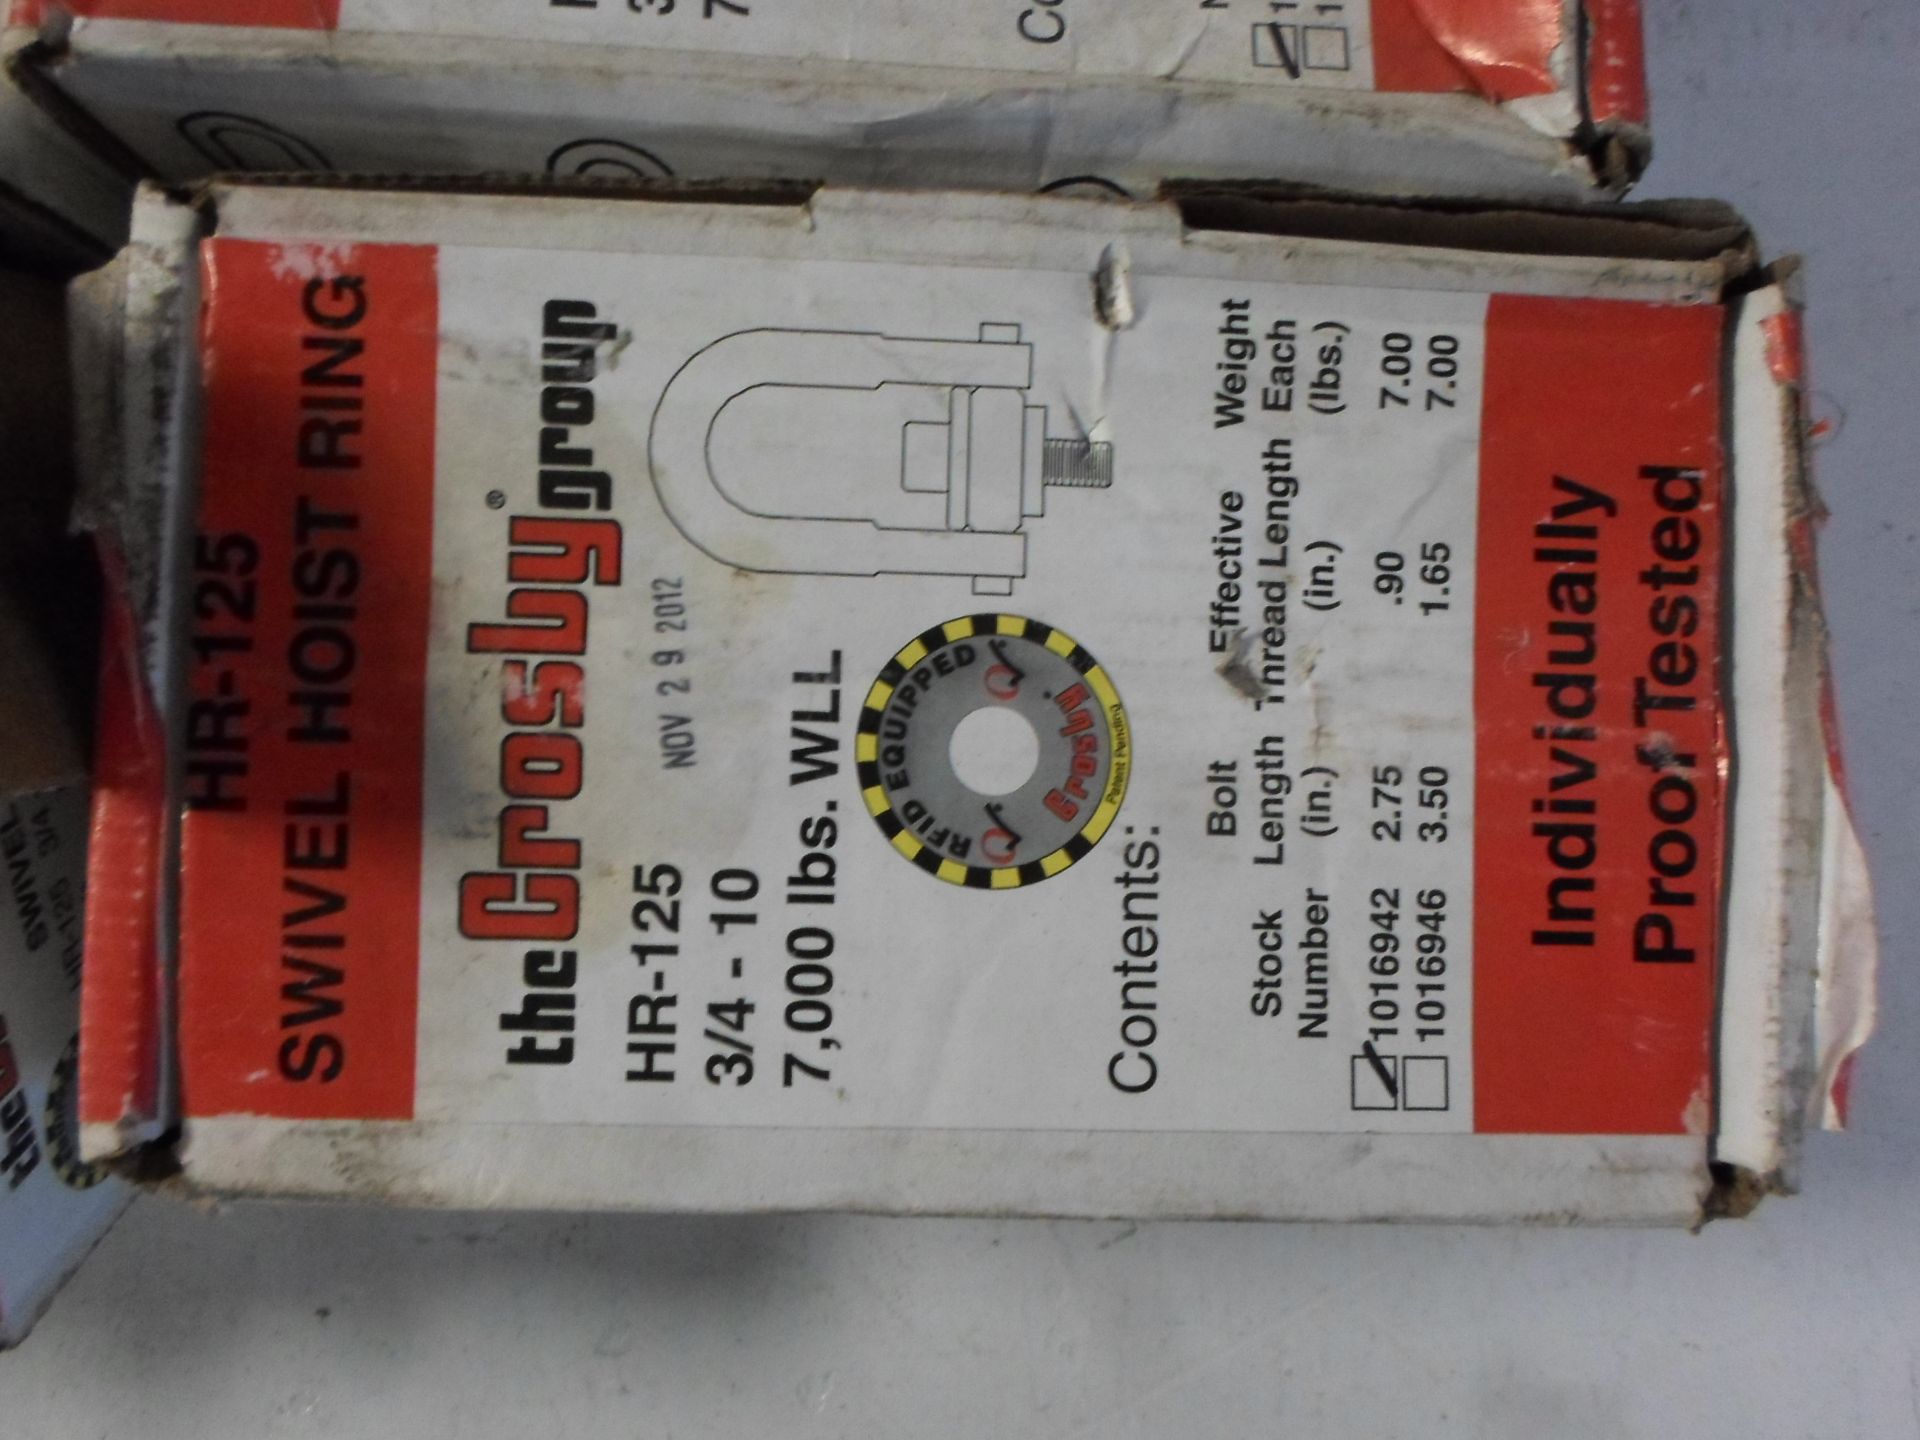 LOT OF FOUR SWIVEL HOIST RING HR-125 THE CROSBY GROUP 7,000 LBS ON IN EACH BOX - Image 3 of 3